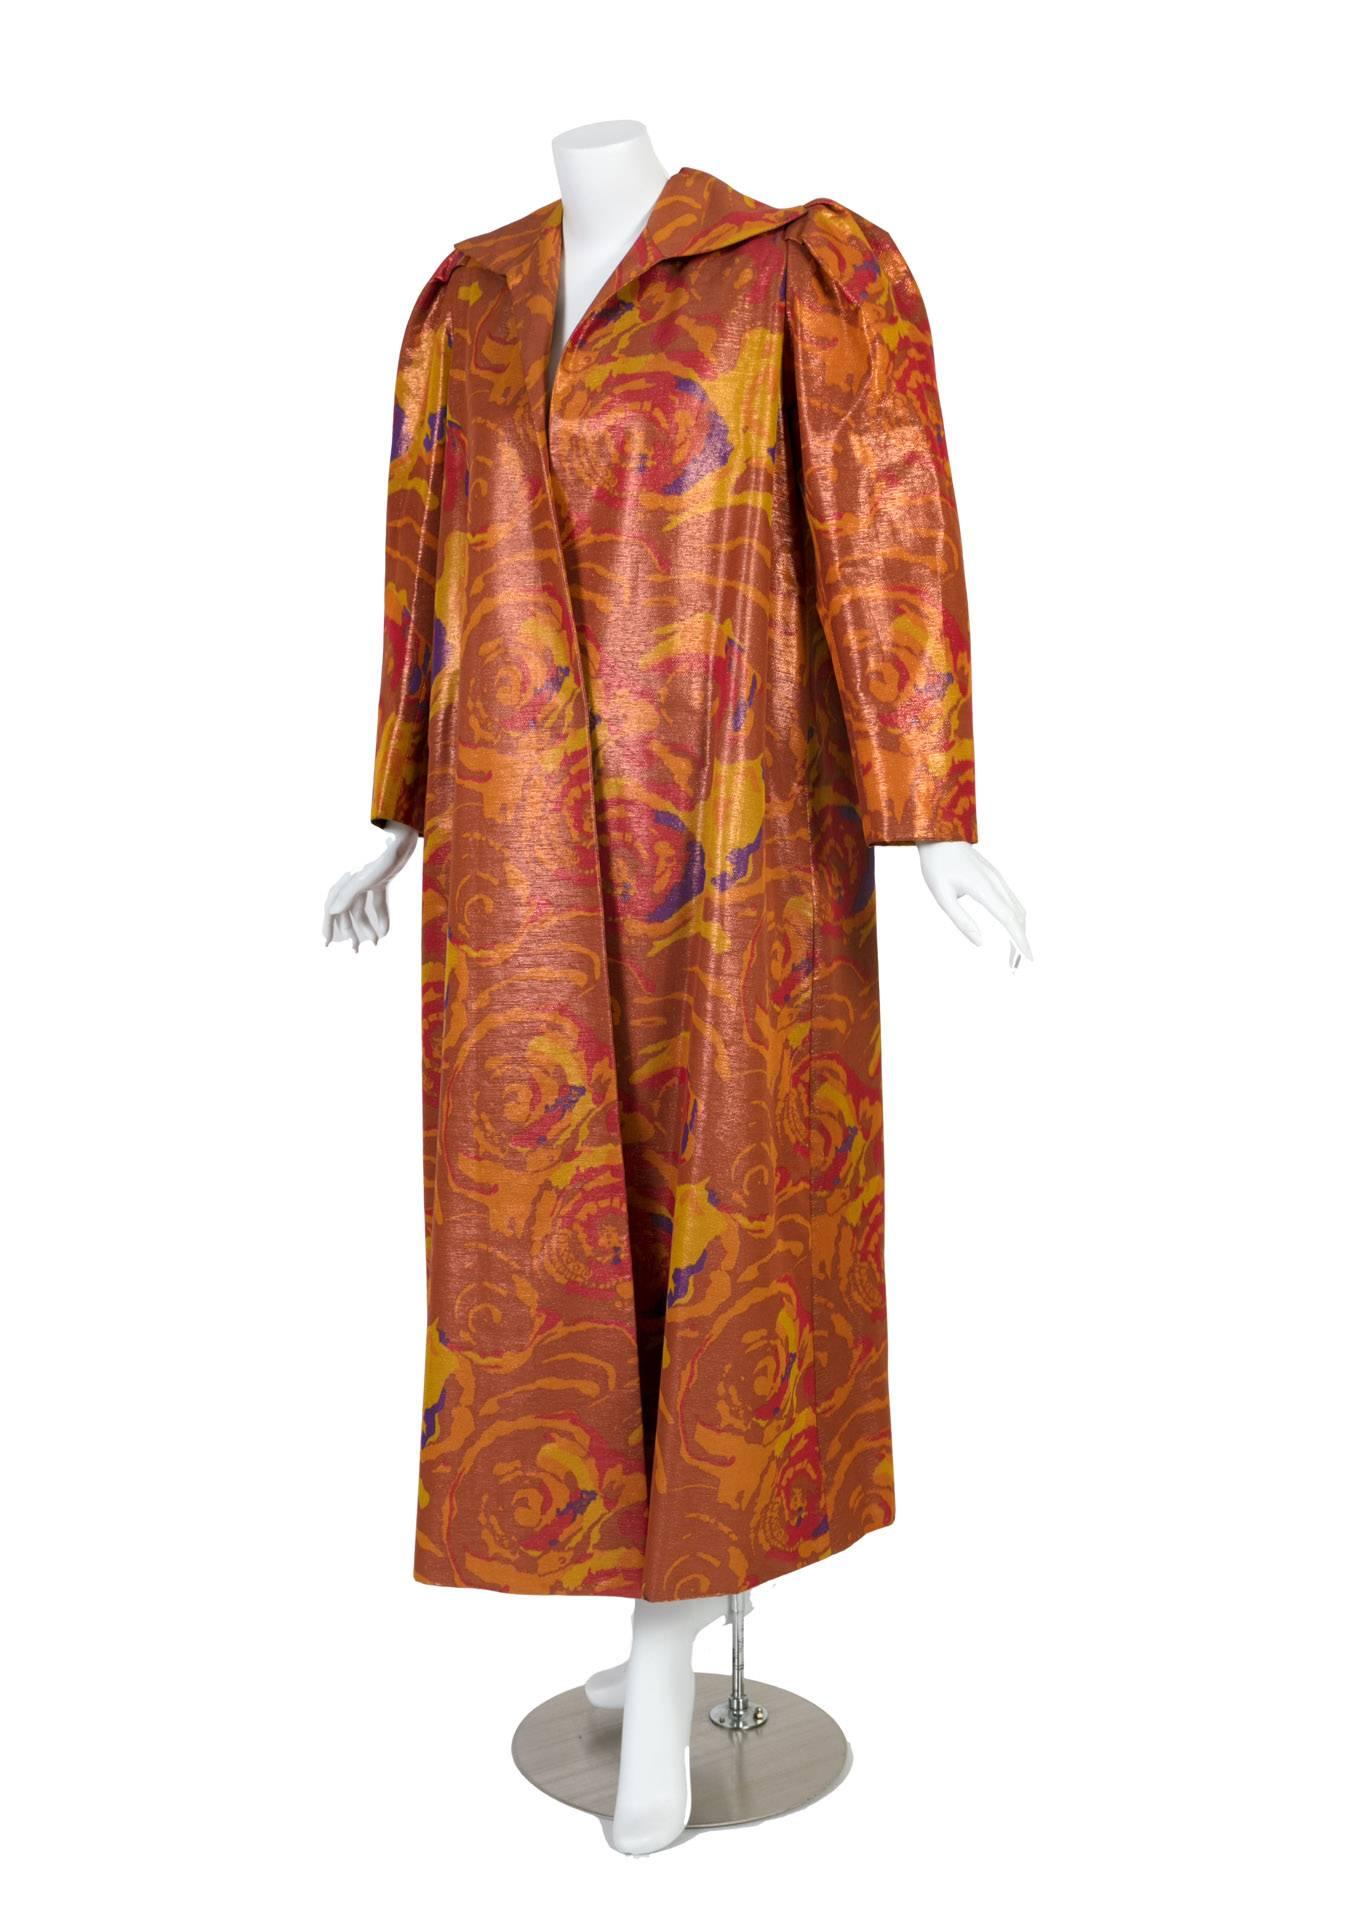 Women's Unlabeled Givenchy Haute Couture Copper Floral Silk  Evening Coat Vintage For Sale